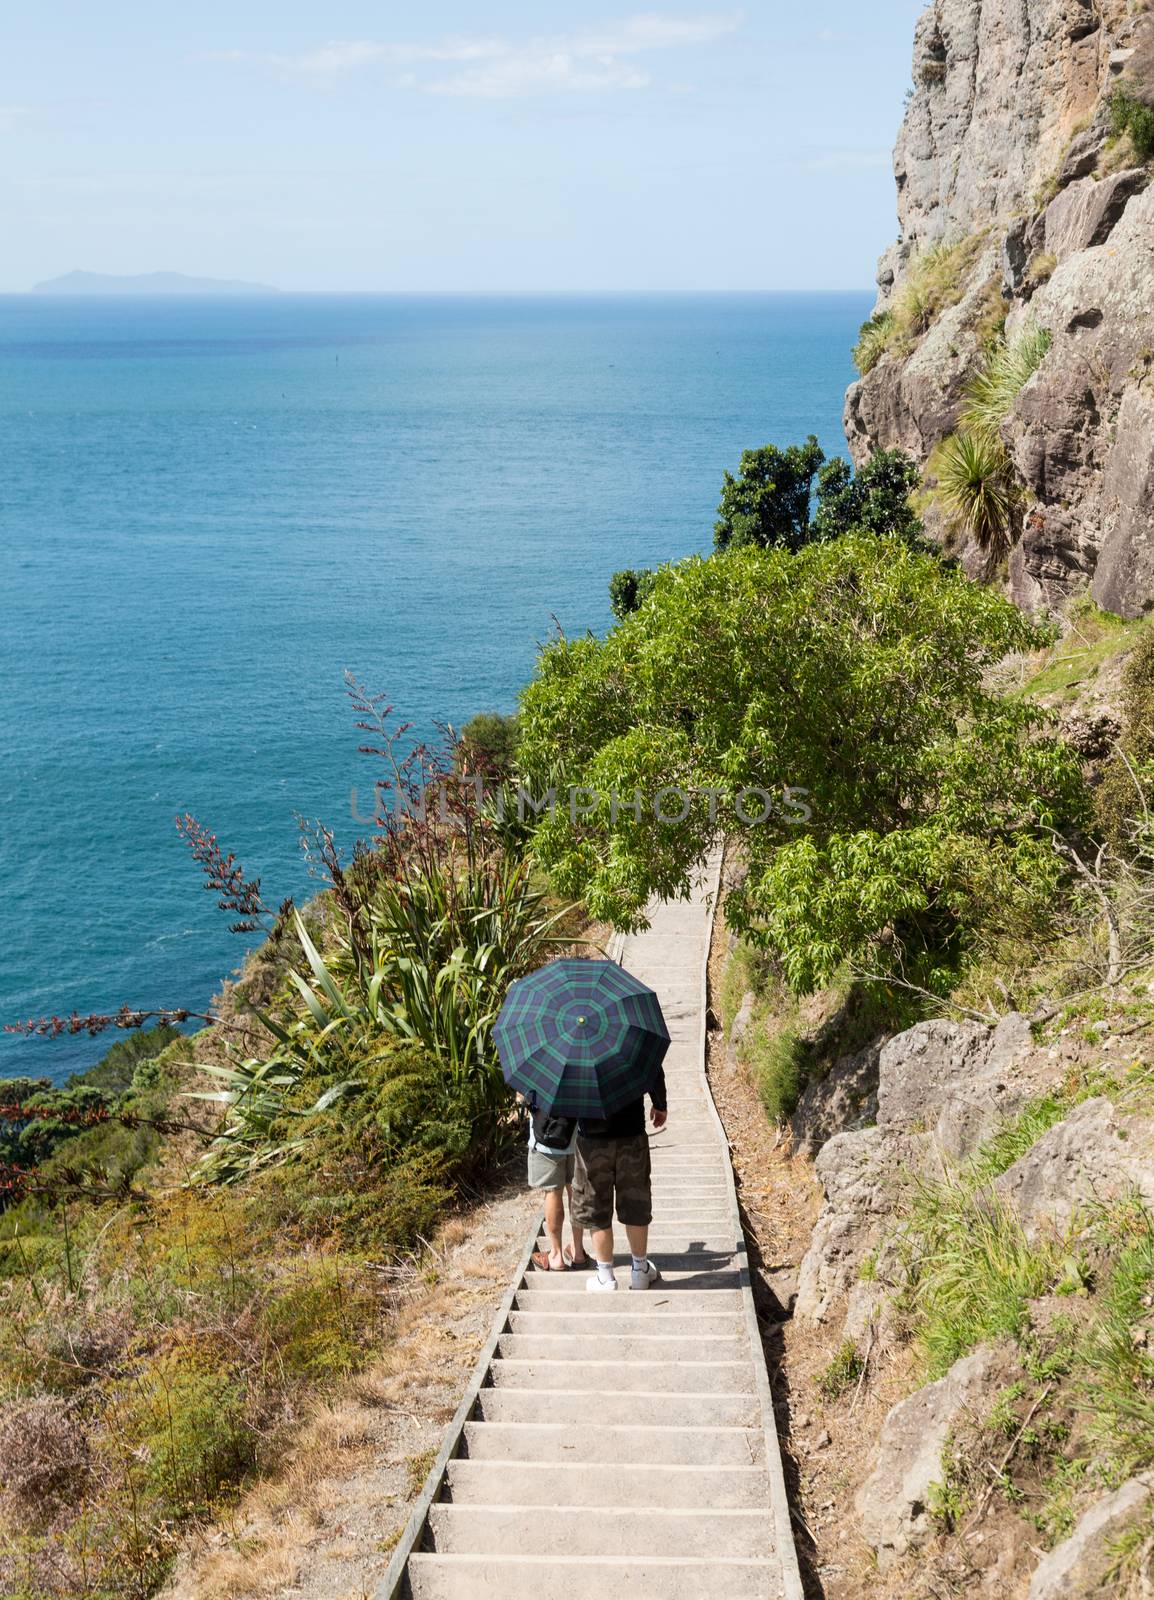 Two men with umbrella as sun shade hike the steep path around the Mount in Tauranga New Zealand